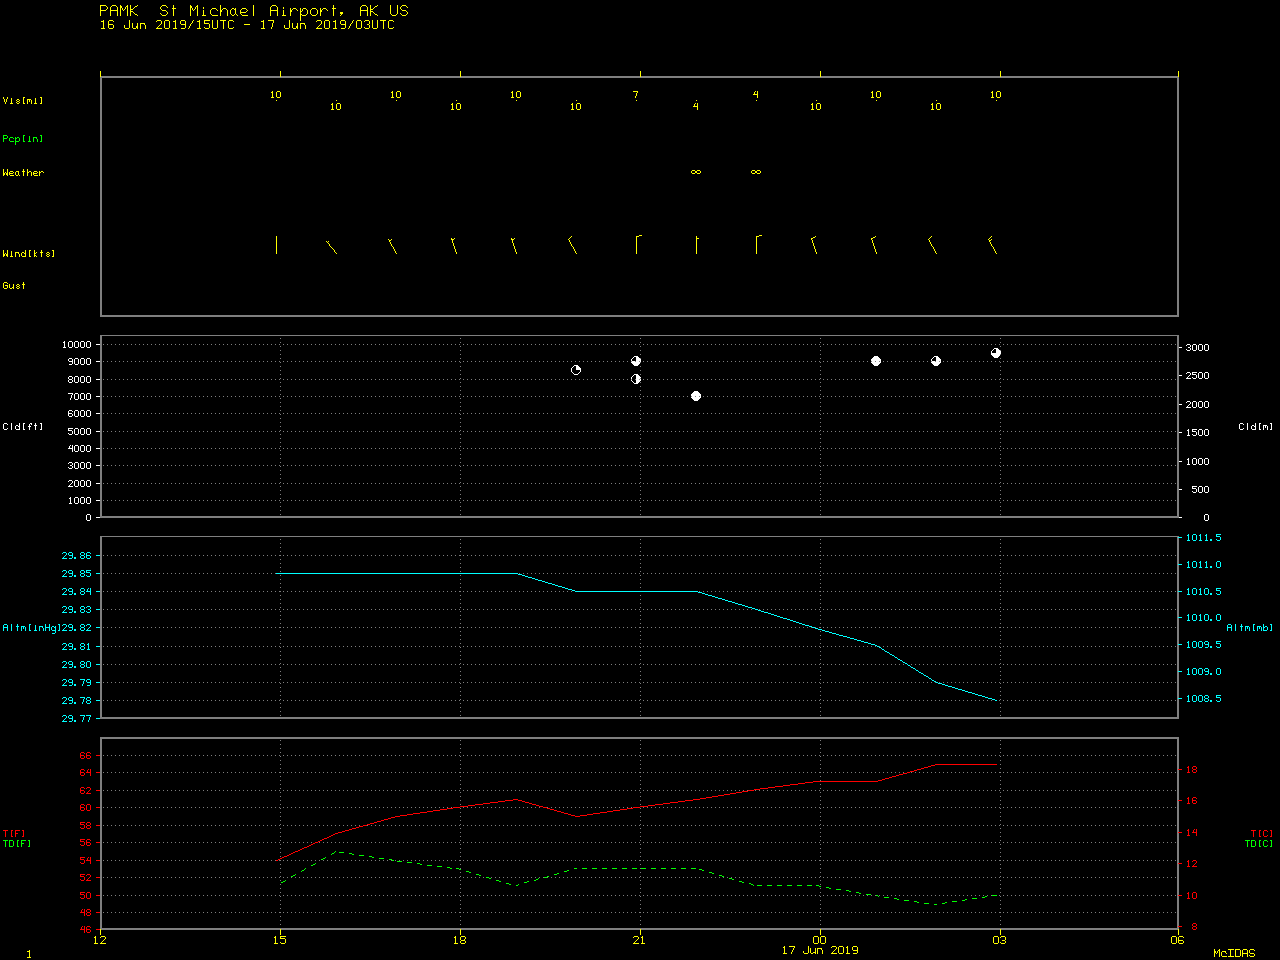 Time series plot of surface observation data from St. Michael [click to enlarge]